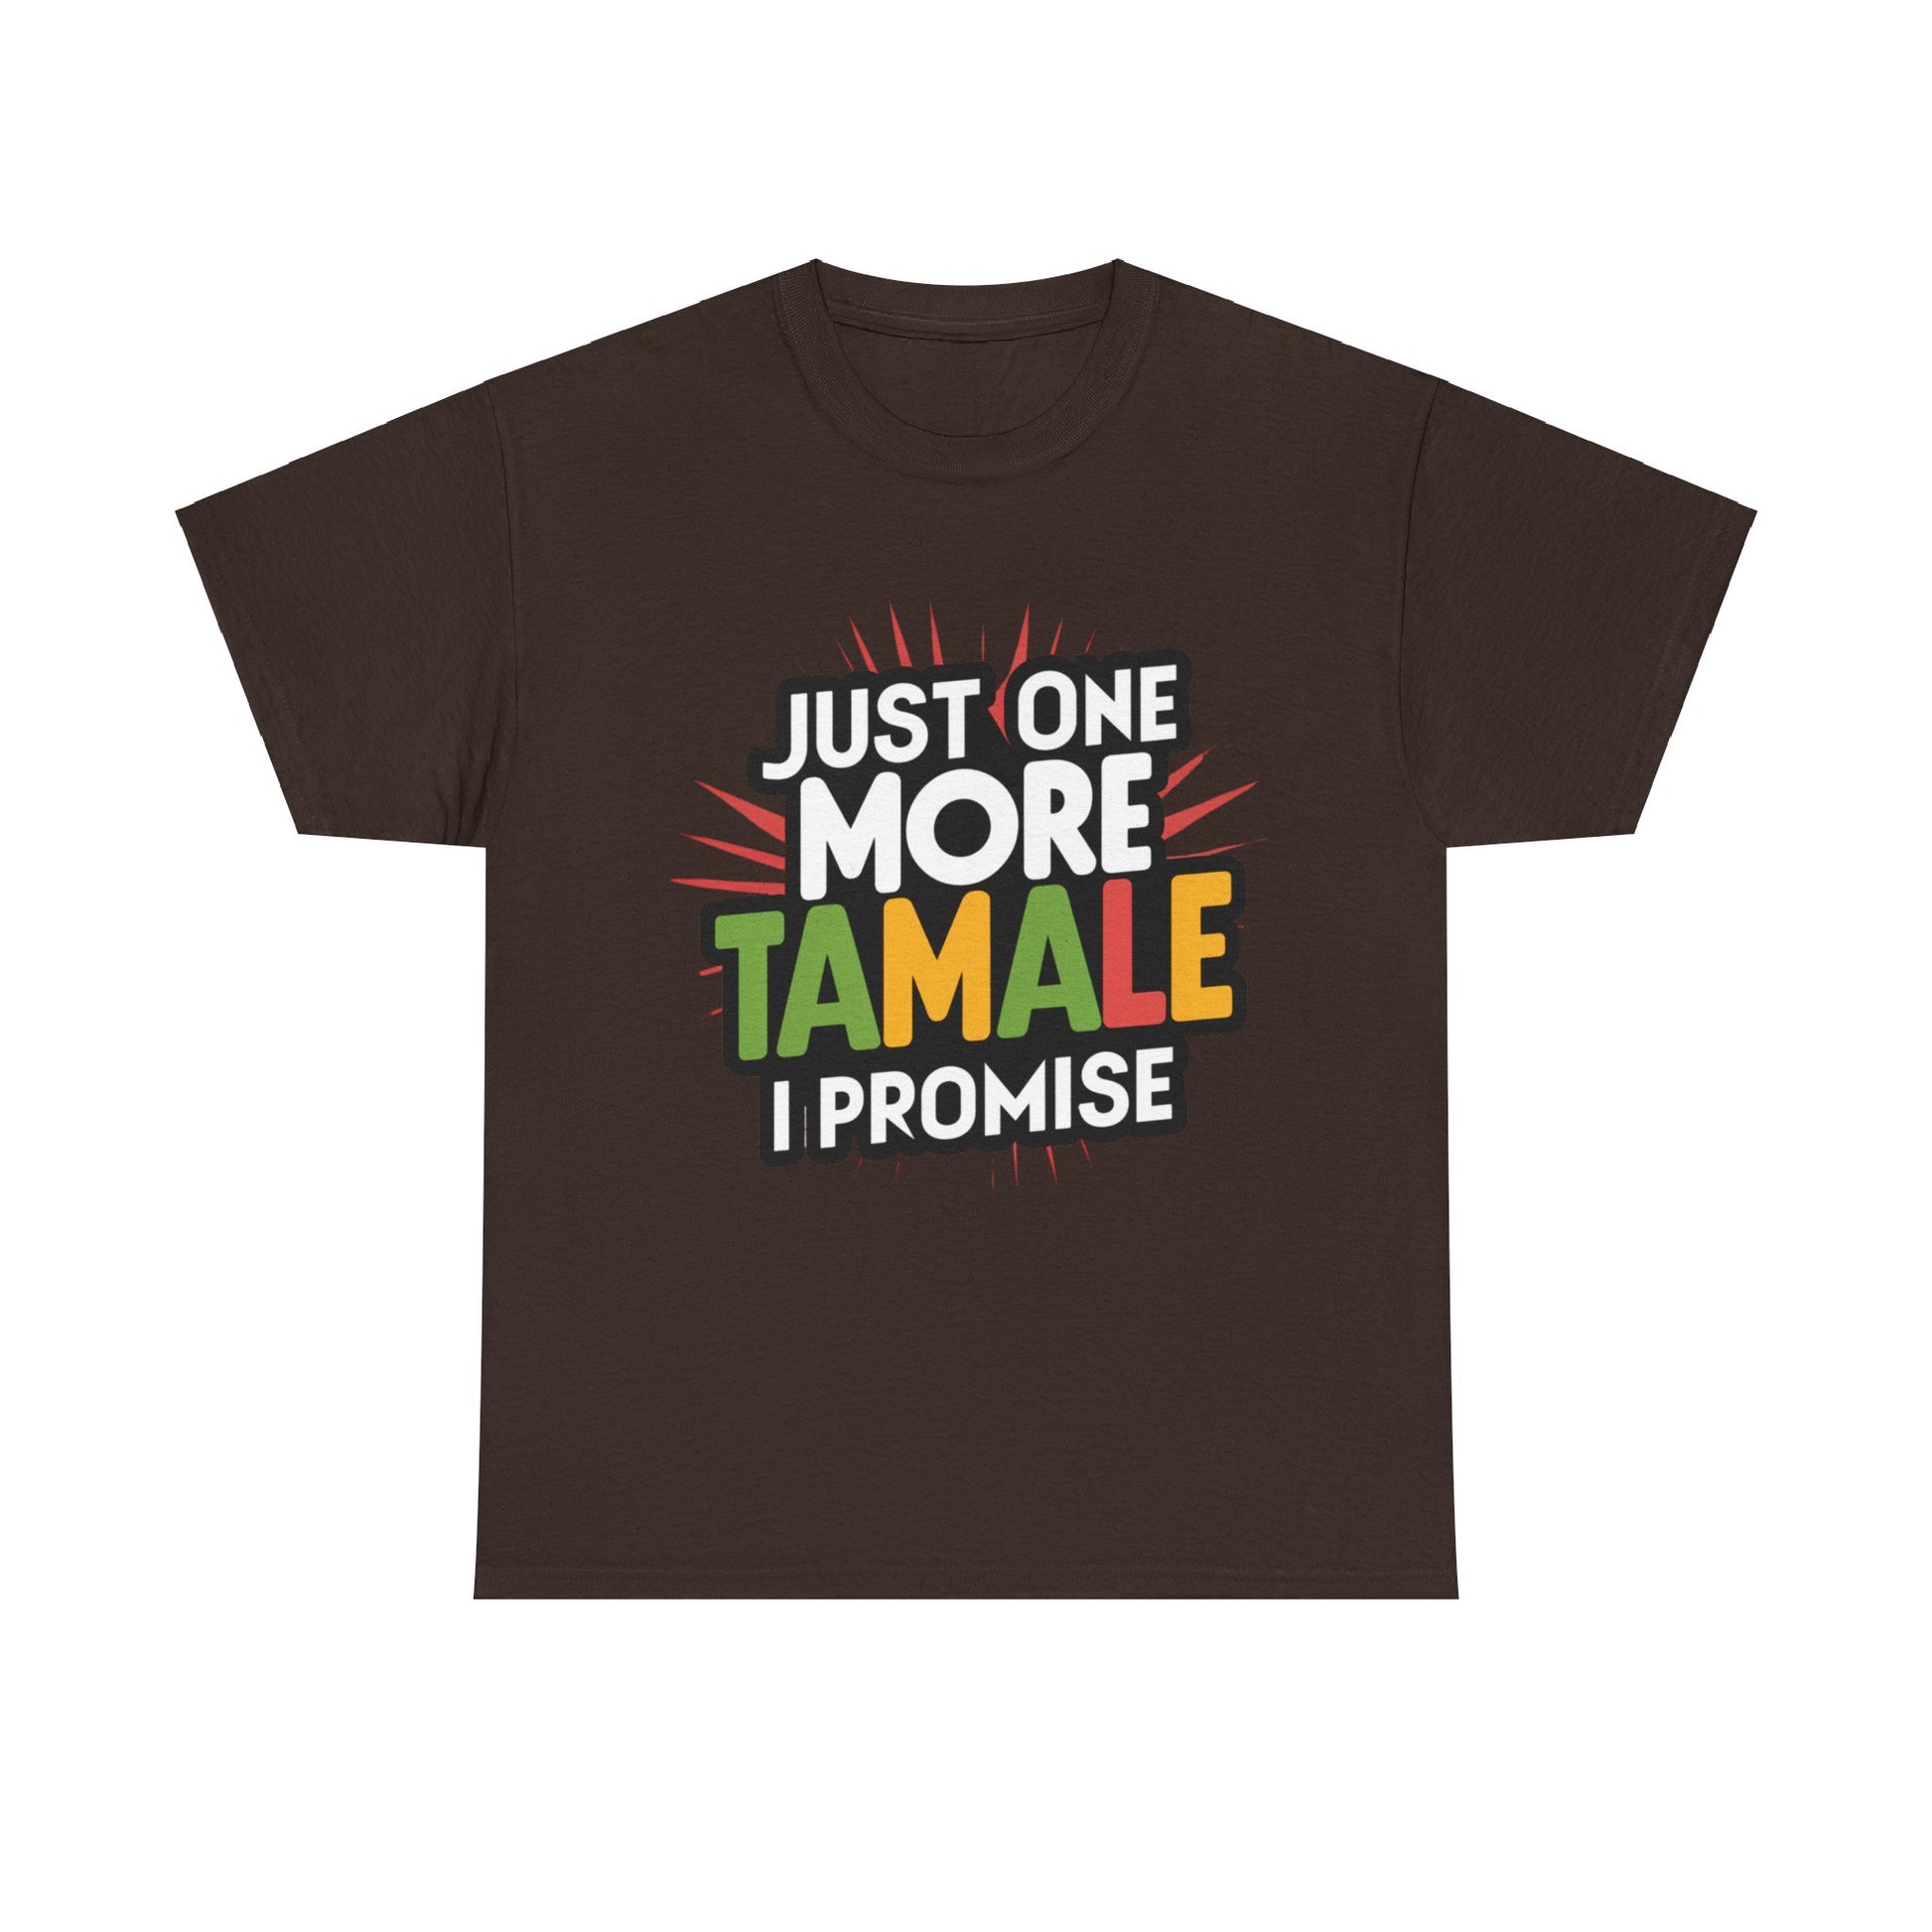 Just One More Tamale I Promise Mexican Food Graphic Unisex Heavy Cotton Tee Cotton Funny Humorous Graphic Soft Premium Unisex Men Women Dark Chocolate T-shirt Birthday Gift-3